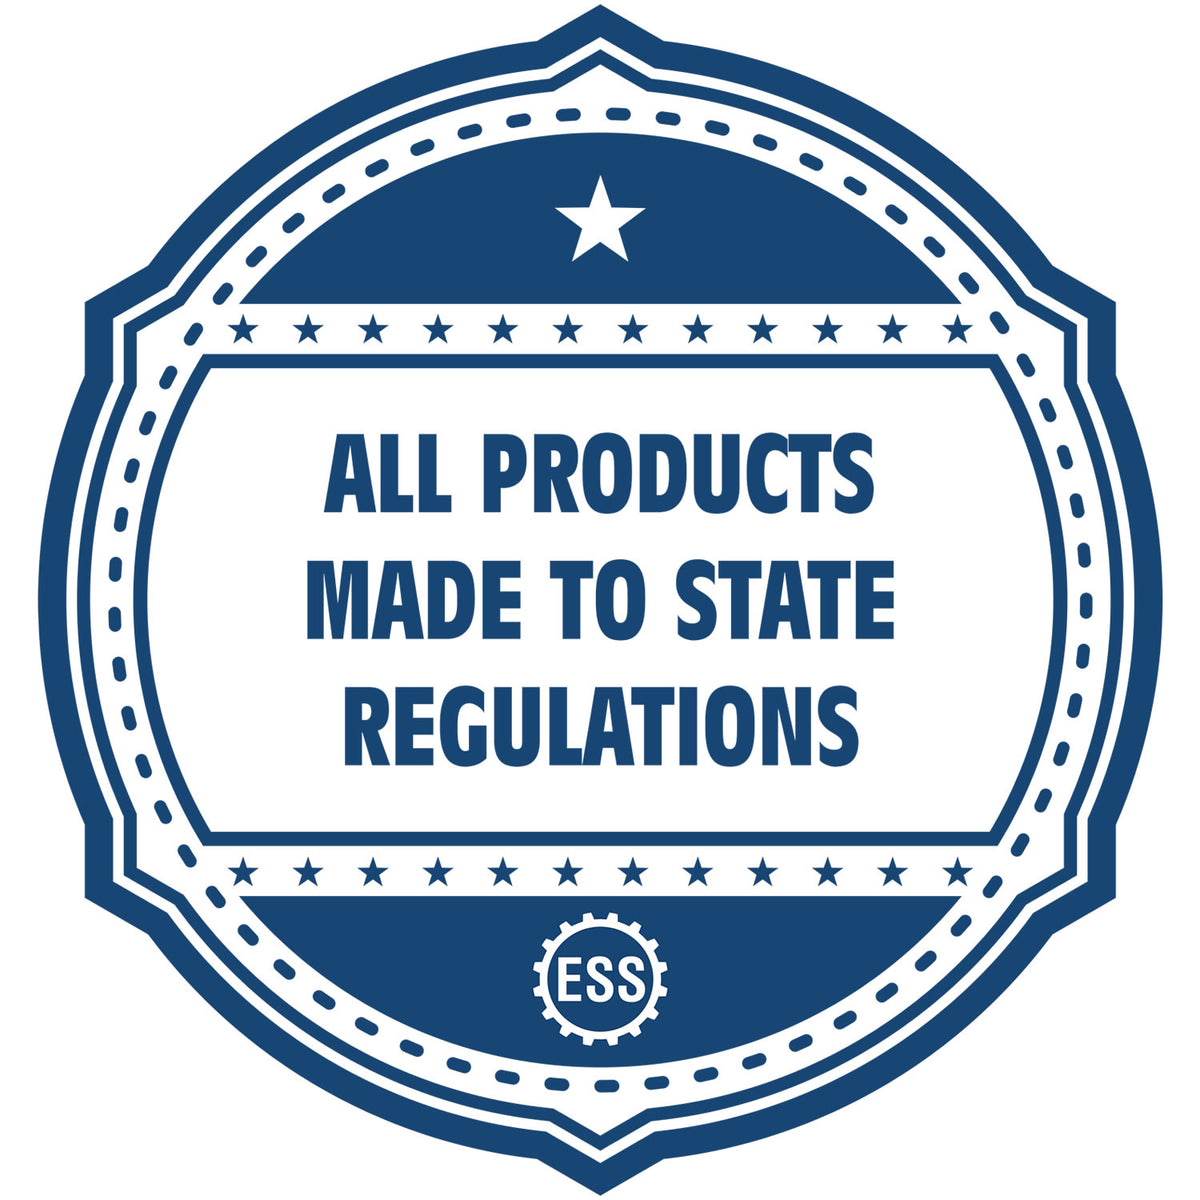 An icon or badge element for the Slim Pre-Inked State Seal Notary Stamp for Michigan showing that this product is made in compliance with state regulations.